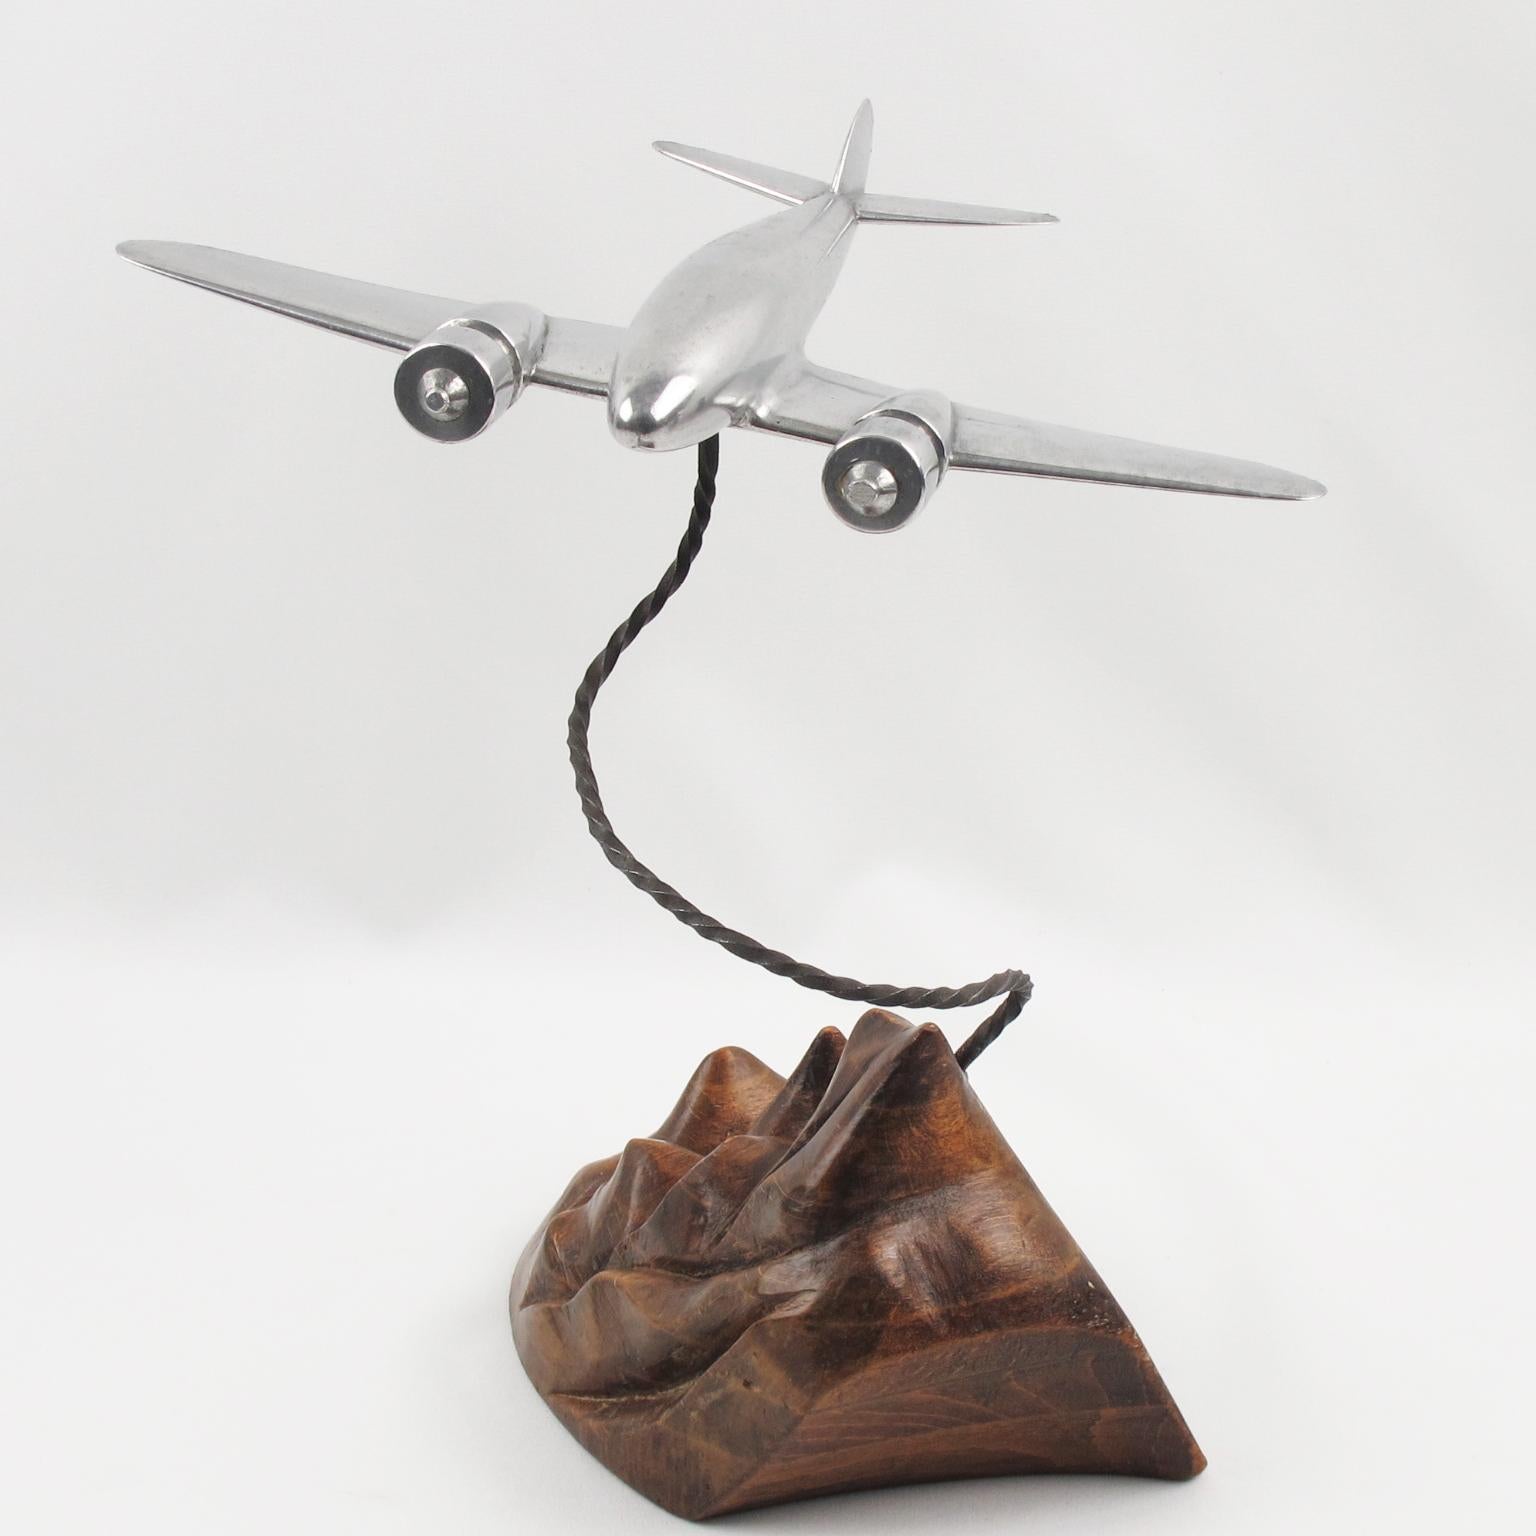 Great looking 1930s wood and aluminum airplane model, mounted on a stylized wooden plinth. This German WWII medium bomber is made of cast aluminum and flying over a carved wood plinth, probably figuring a scene of The Alps mountain. The plane can